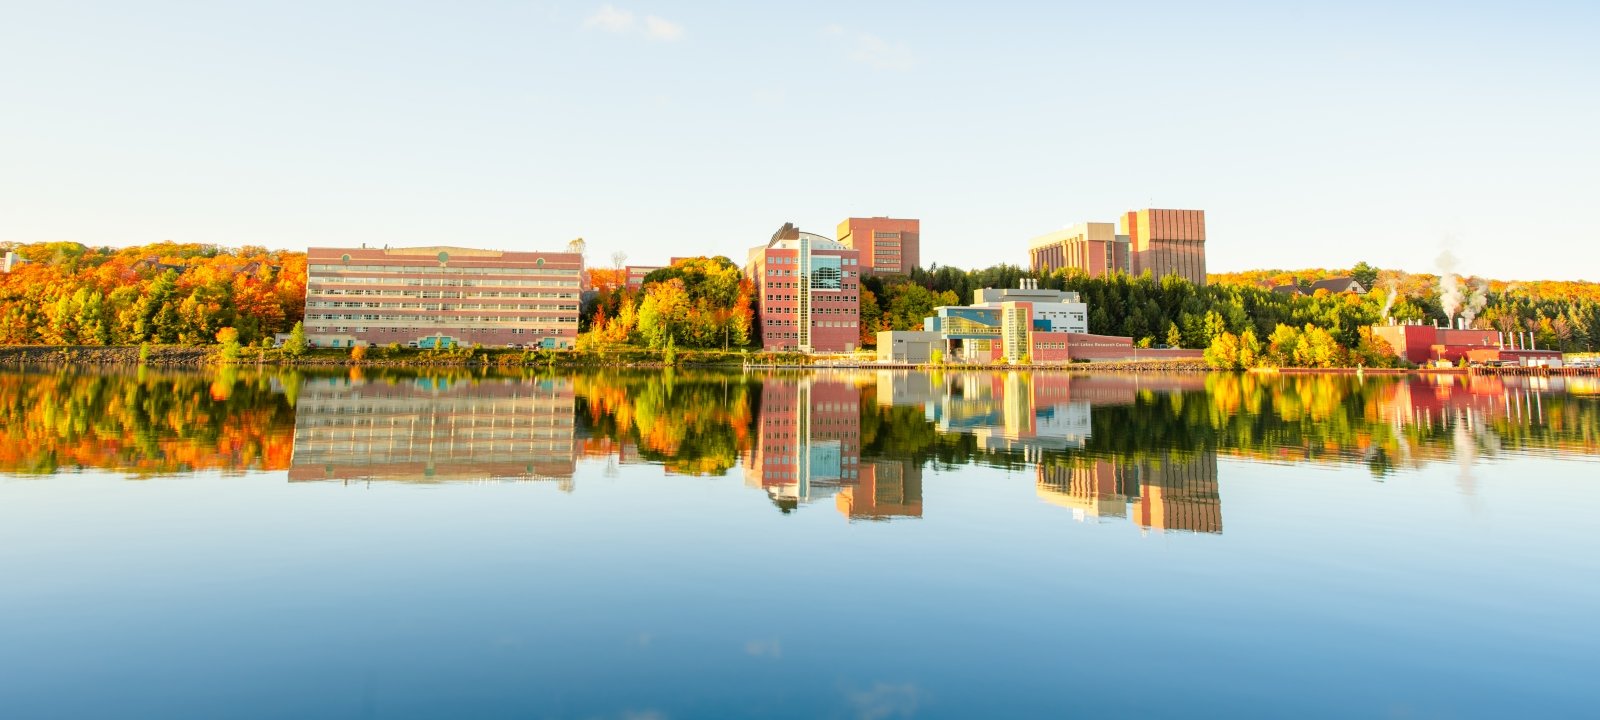 Campus reflection on the Keweenaw Waterway in fall